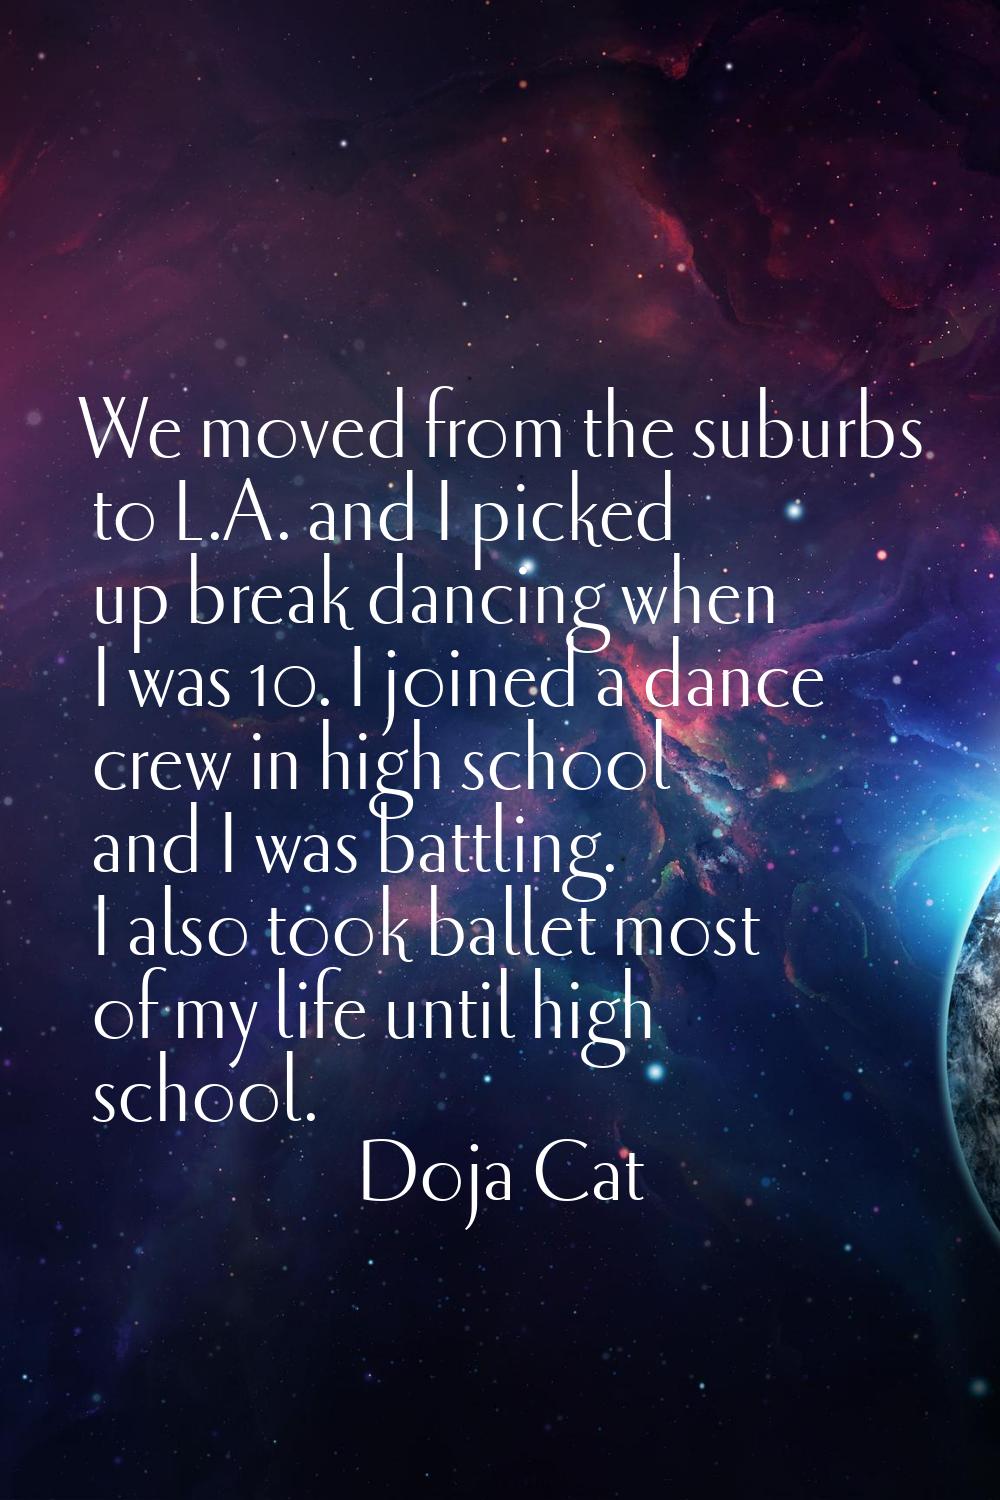 We moved from the suburbs to L.A. and I picked up break dancing when I was 10. I joined a dance cre